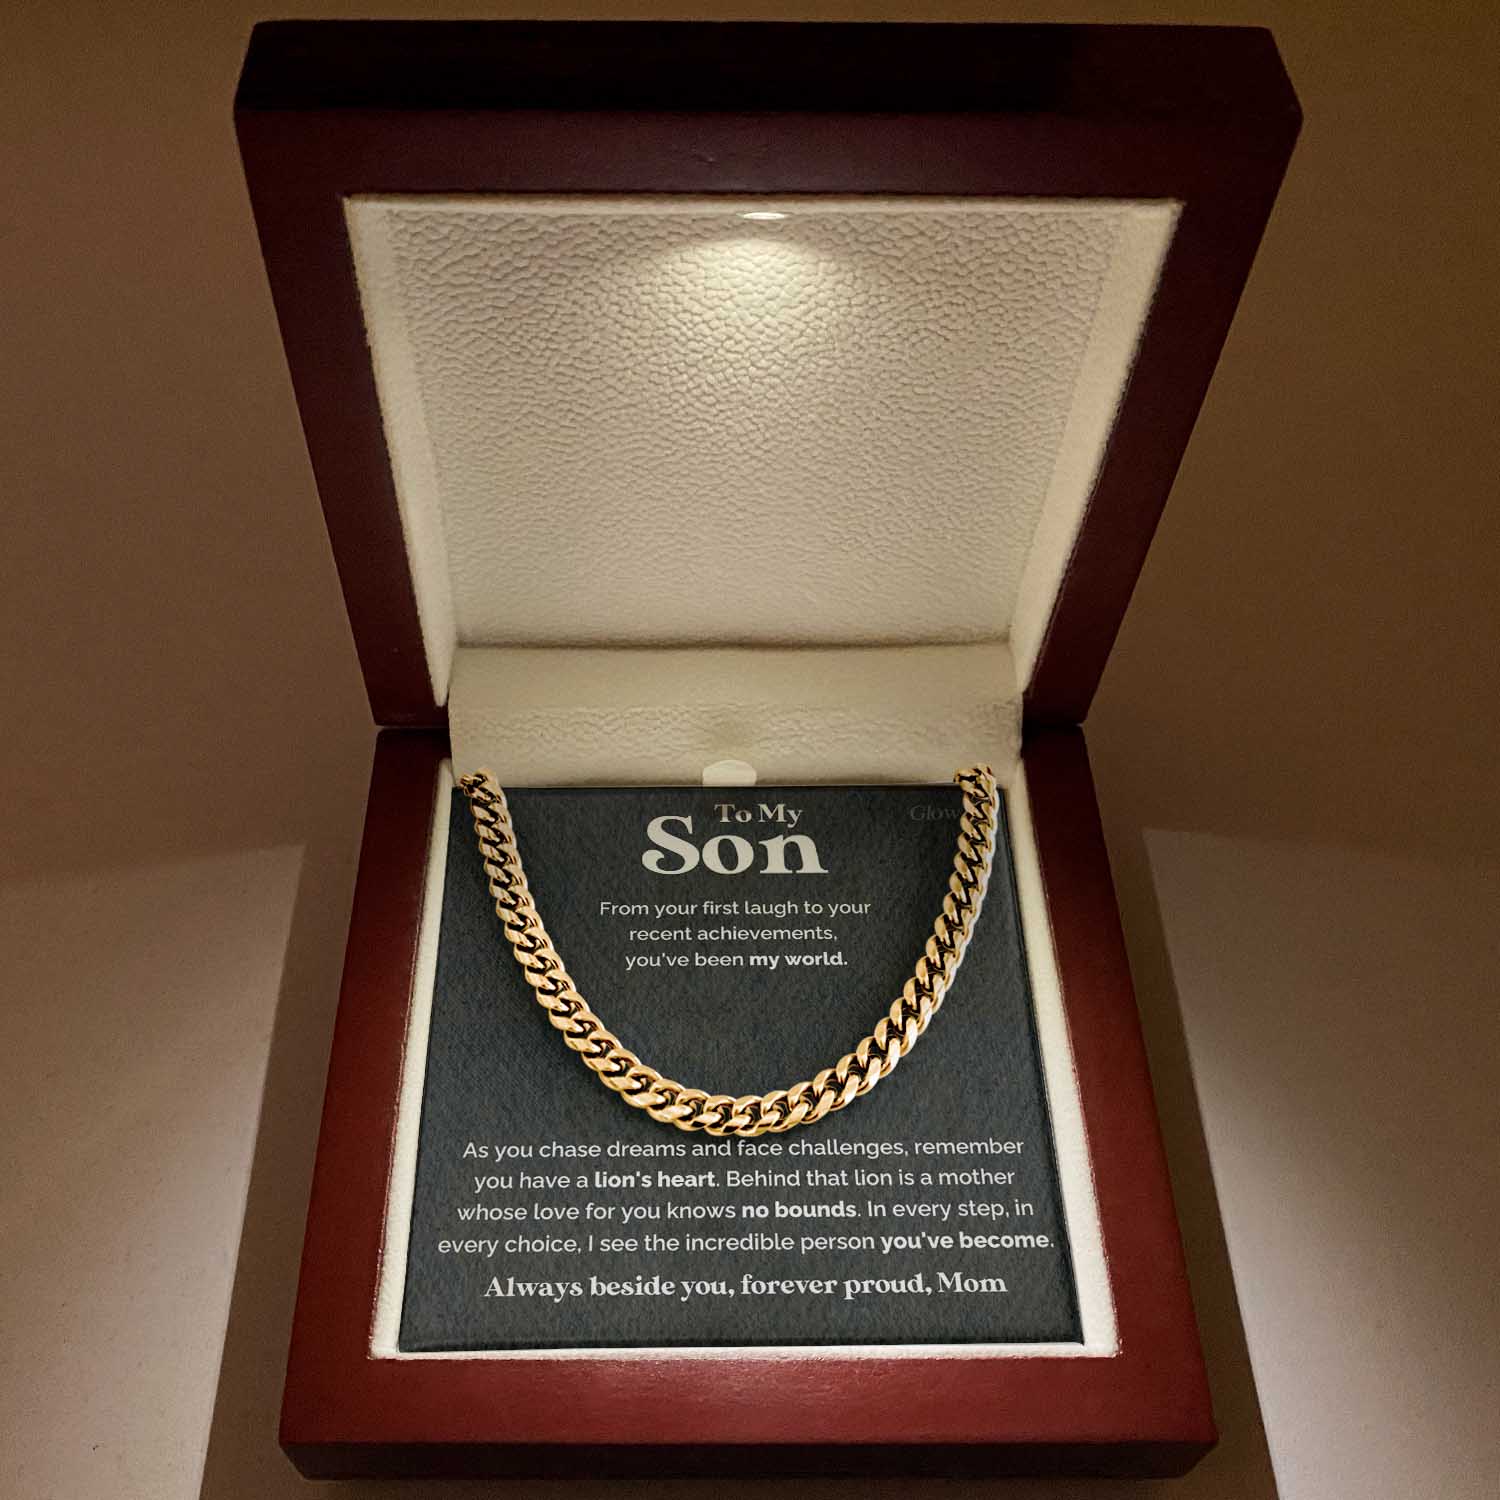 ShineOn Fulfillment Jewelry 14K Yellow Gold Finish / Luxury Box To my Son from Mom - Lion's heart - 5mm Cuban Link Chain